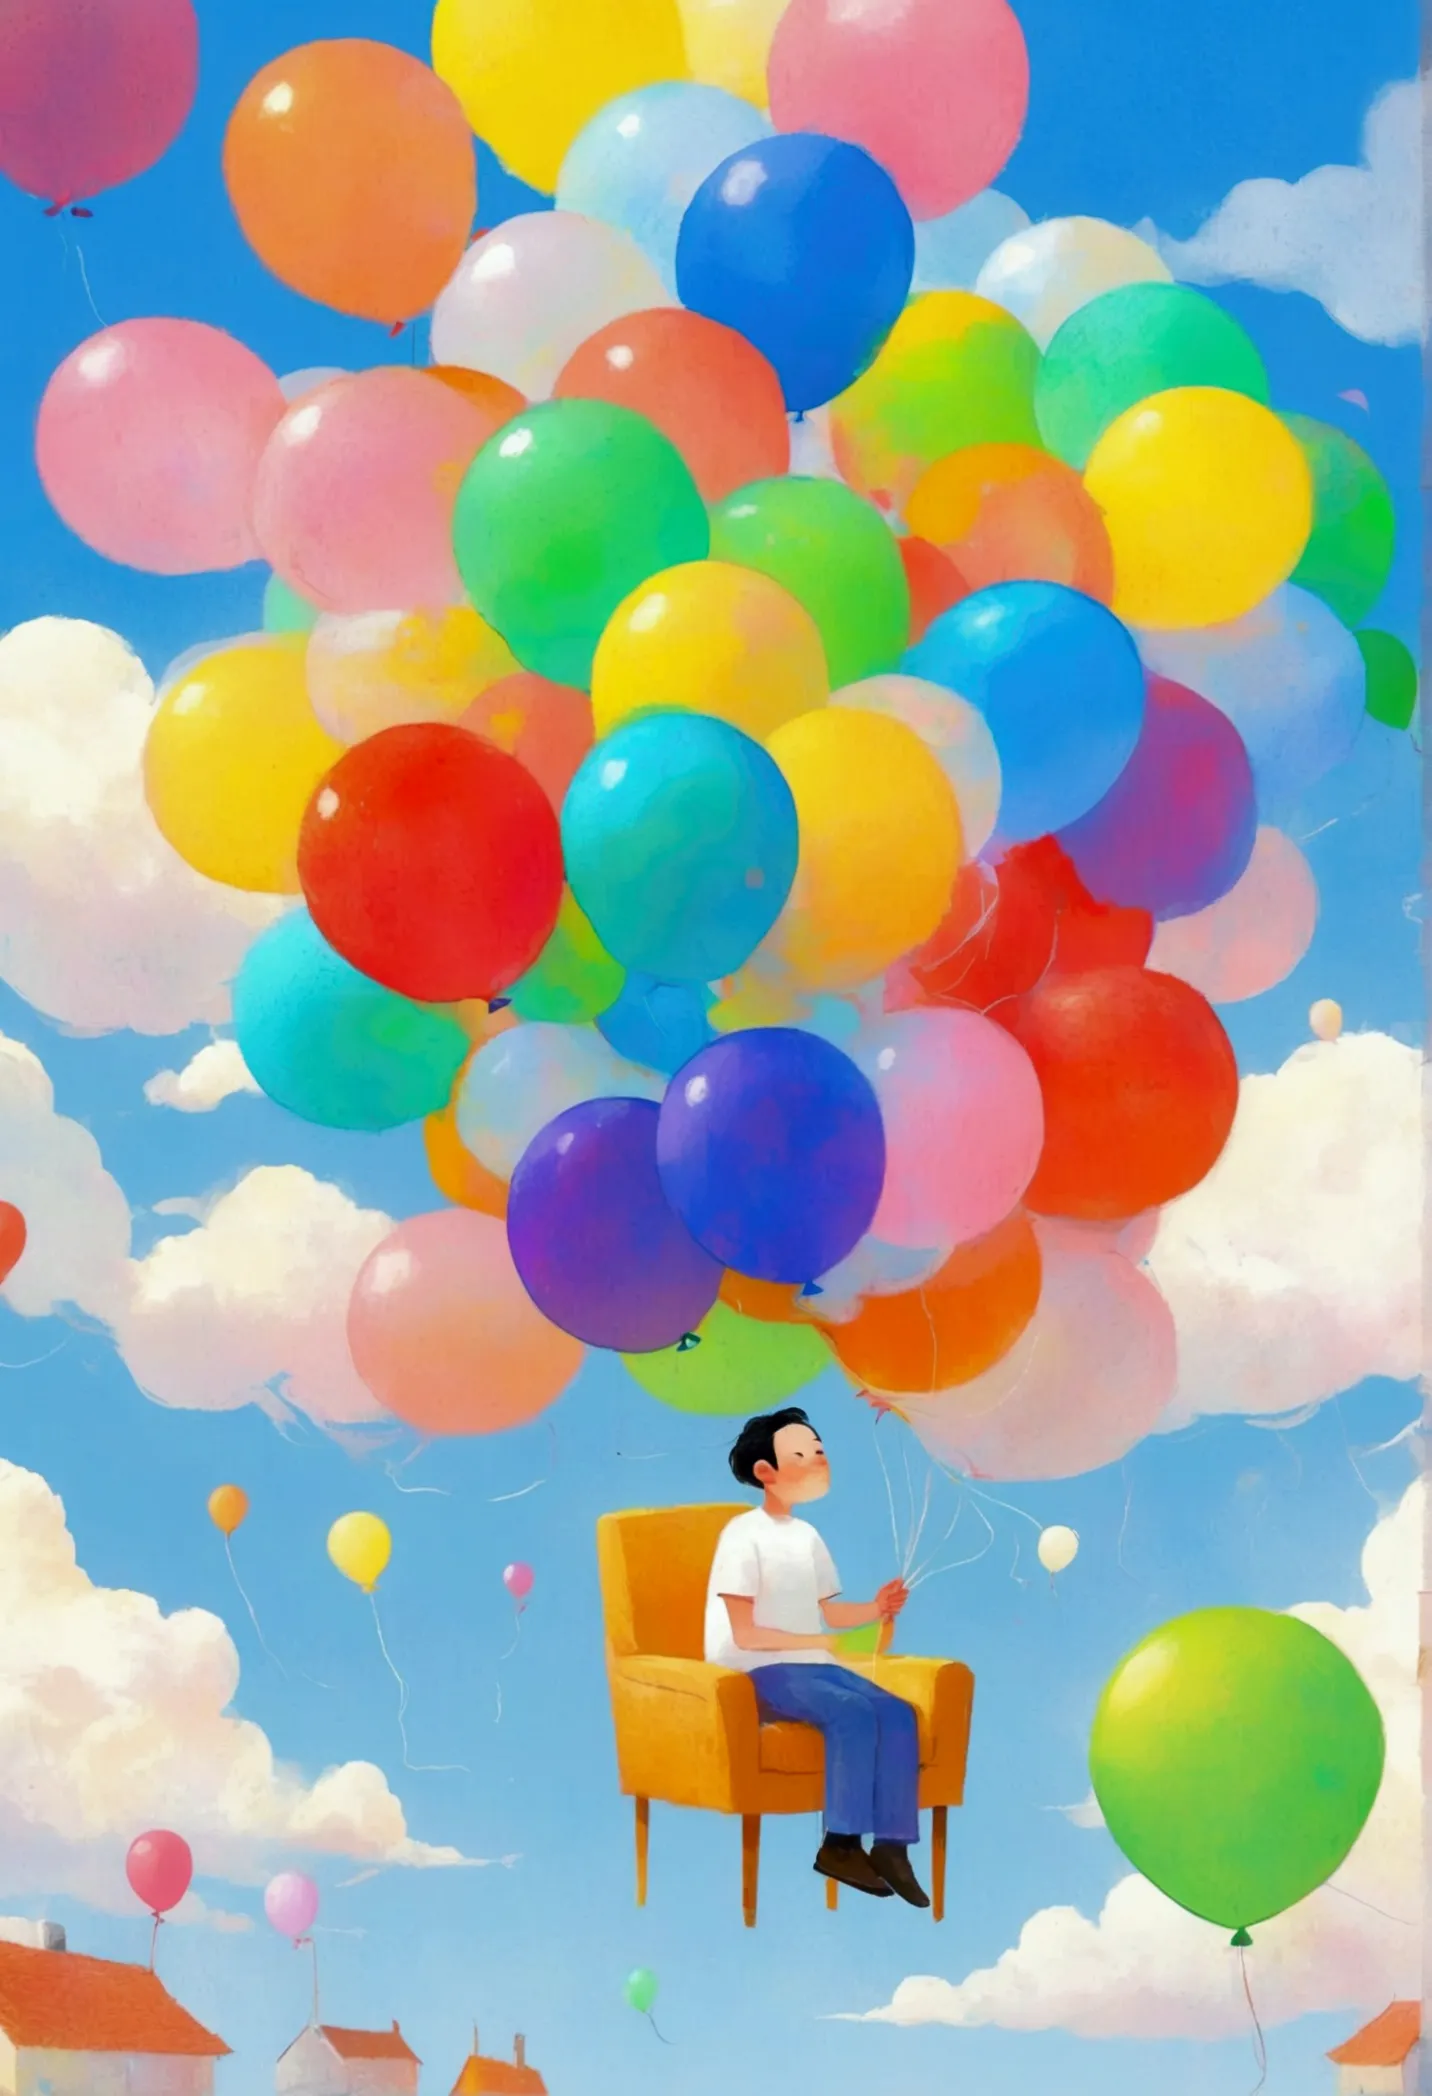 there is a drawing of a man sitting on a chair holding balloons, Li Yinmeng&#39;s Minimalism, Pixel, Concept Art, balloon, autho...